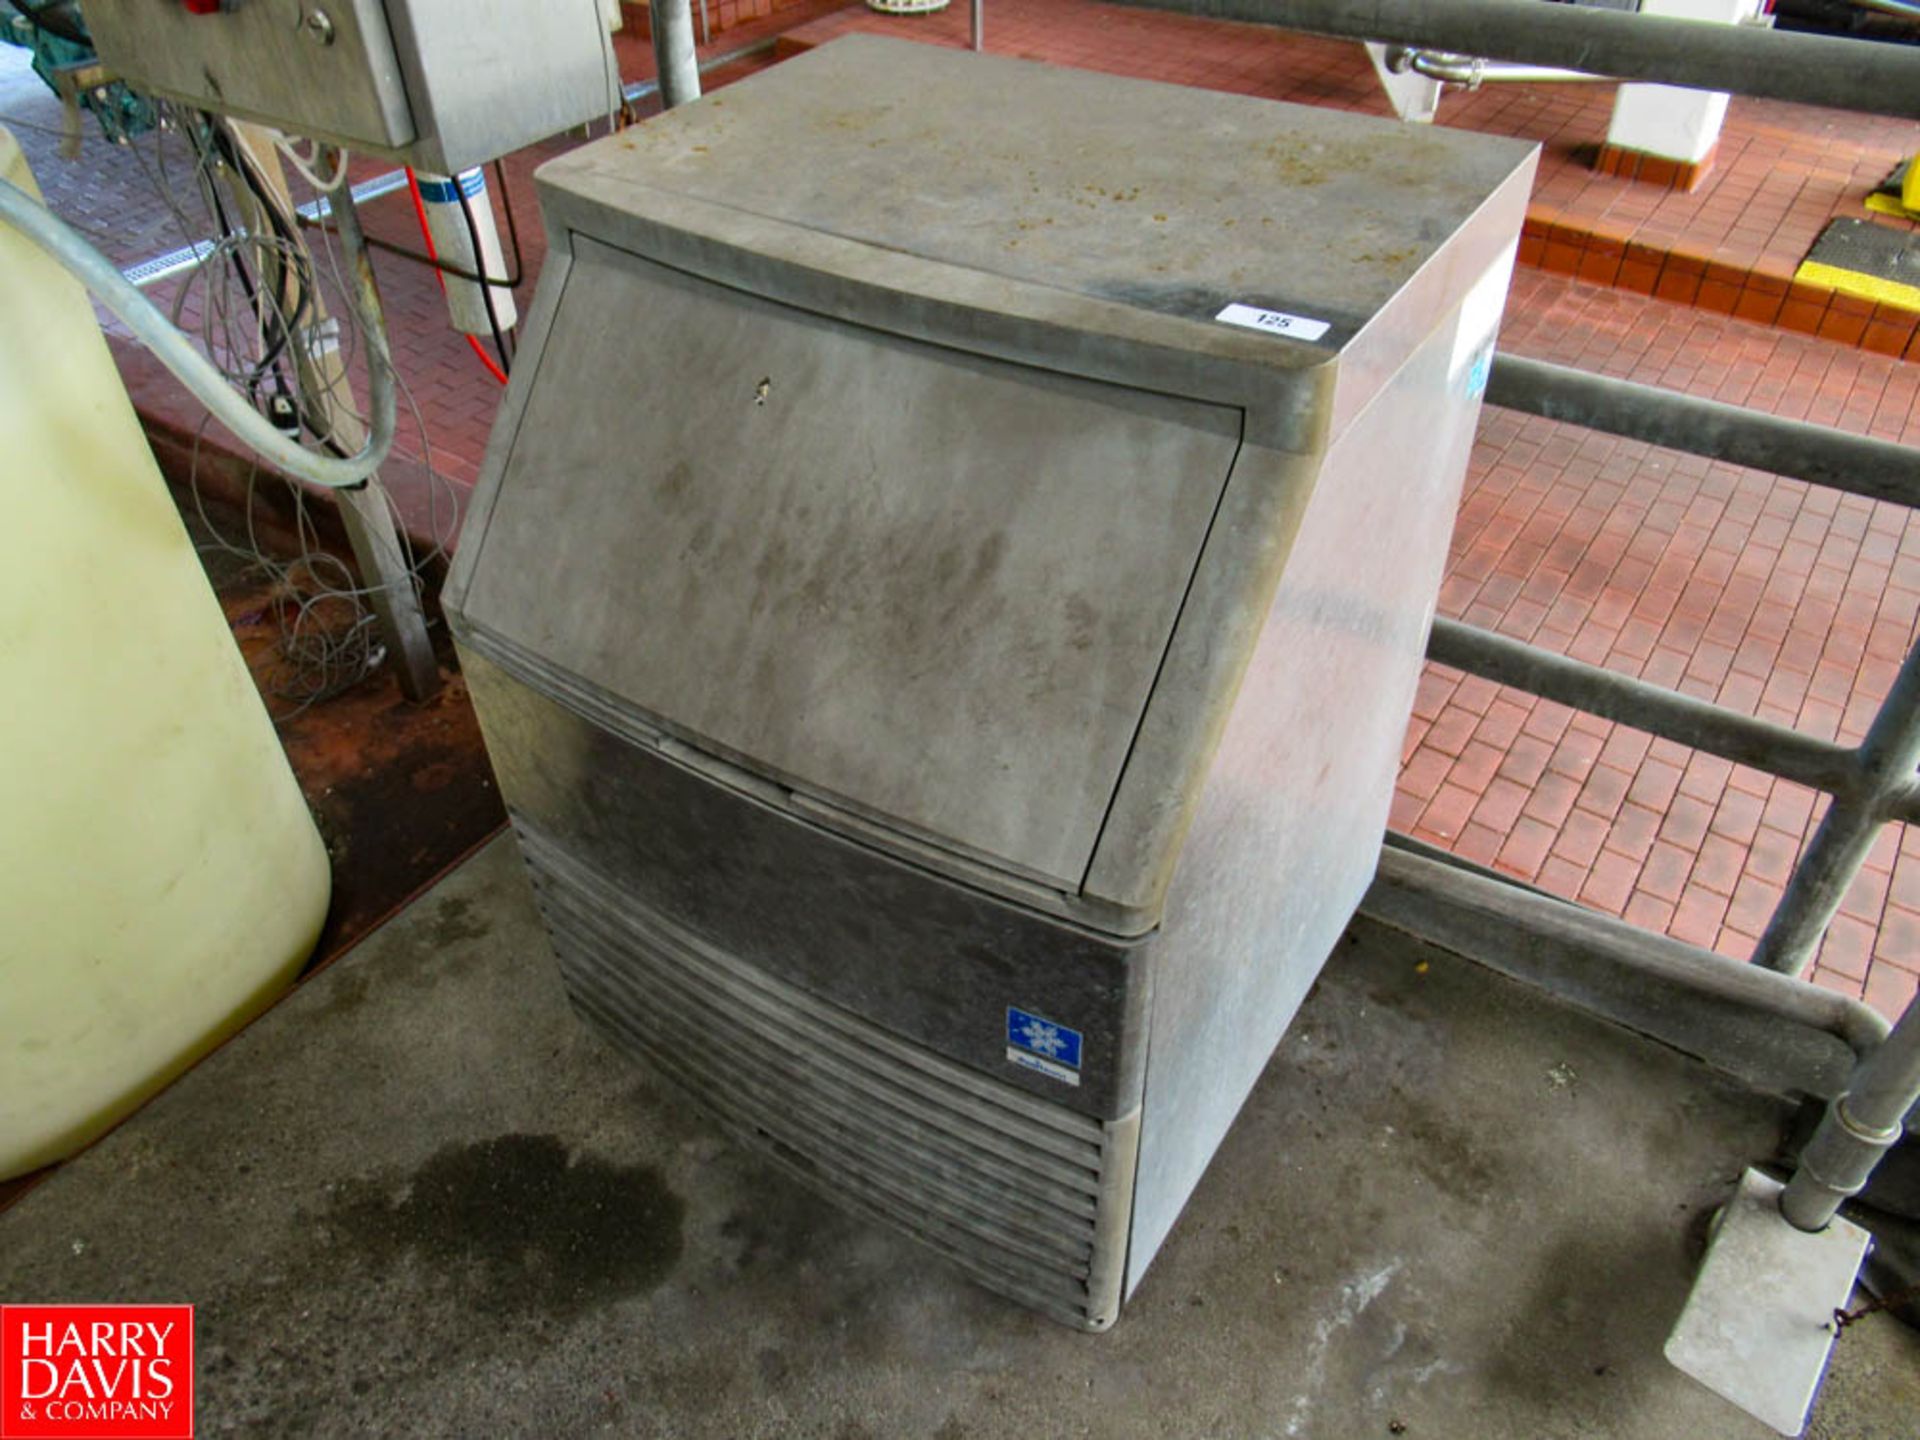 Manitowoc Ice Maker, Model QD0-2/2A, SN: 310081309: Located In: Raw Receiving Dock - Rigging